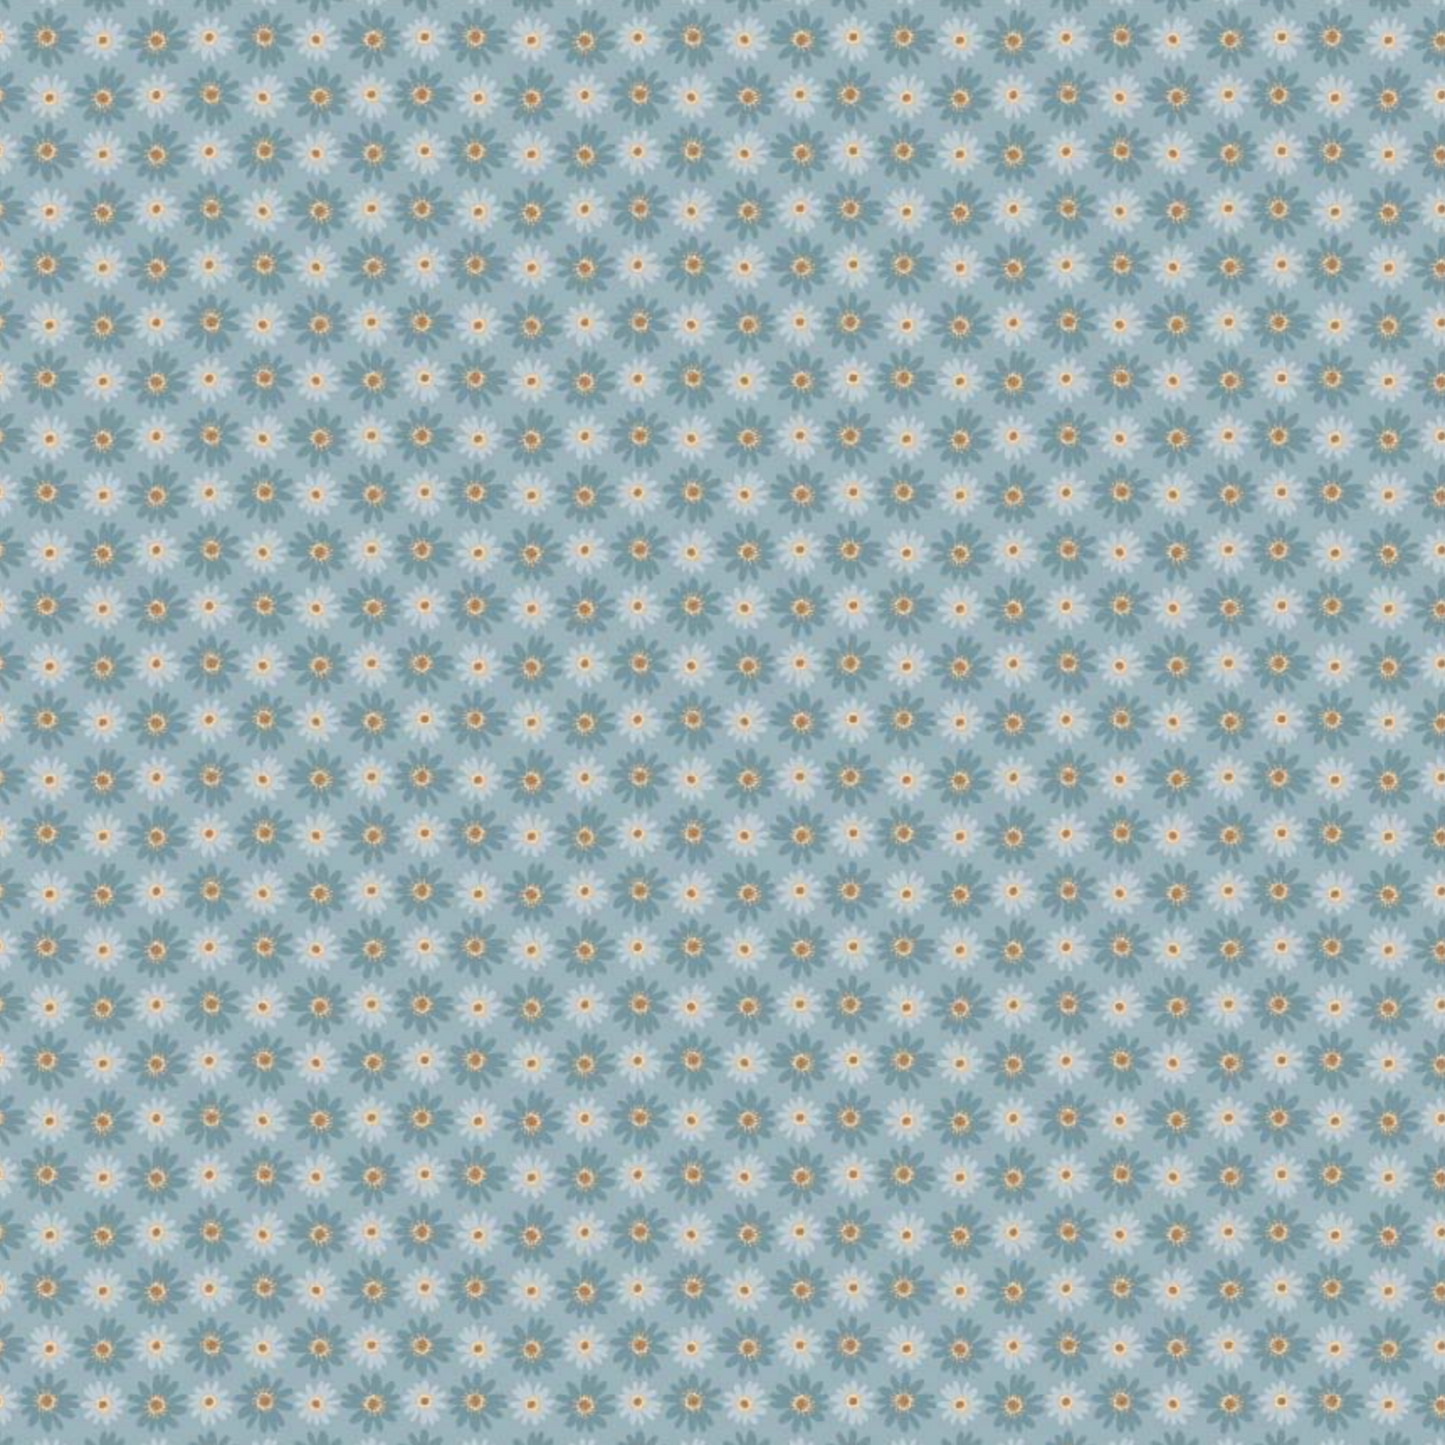 Nature Sings Fabric, Daisy Bunch, Blue, NS24107, sold by the 1/2 yard, *PREORDER